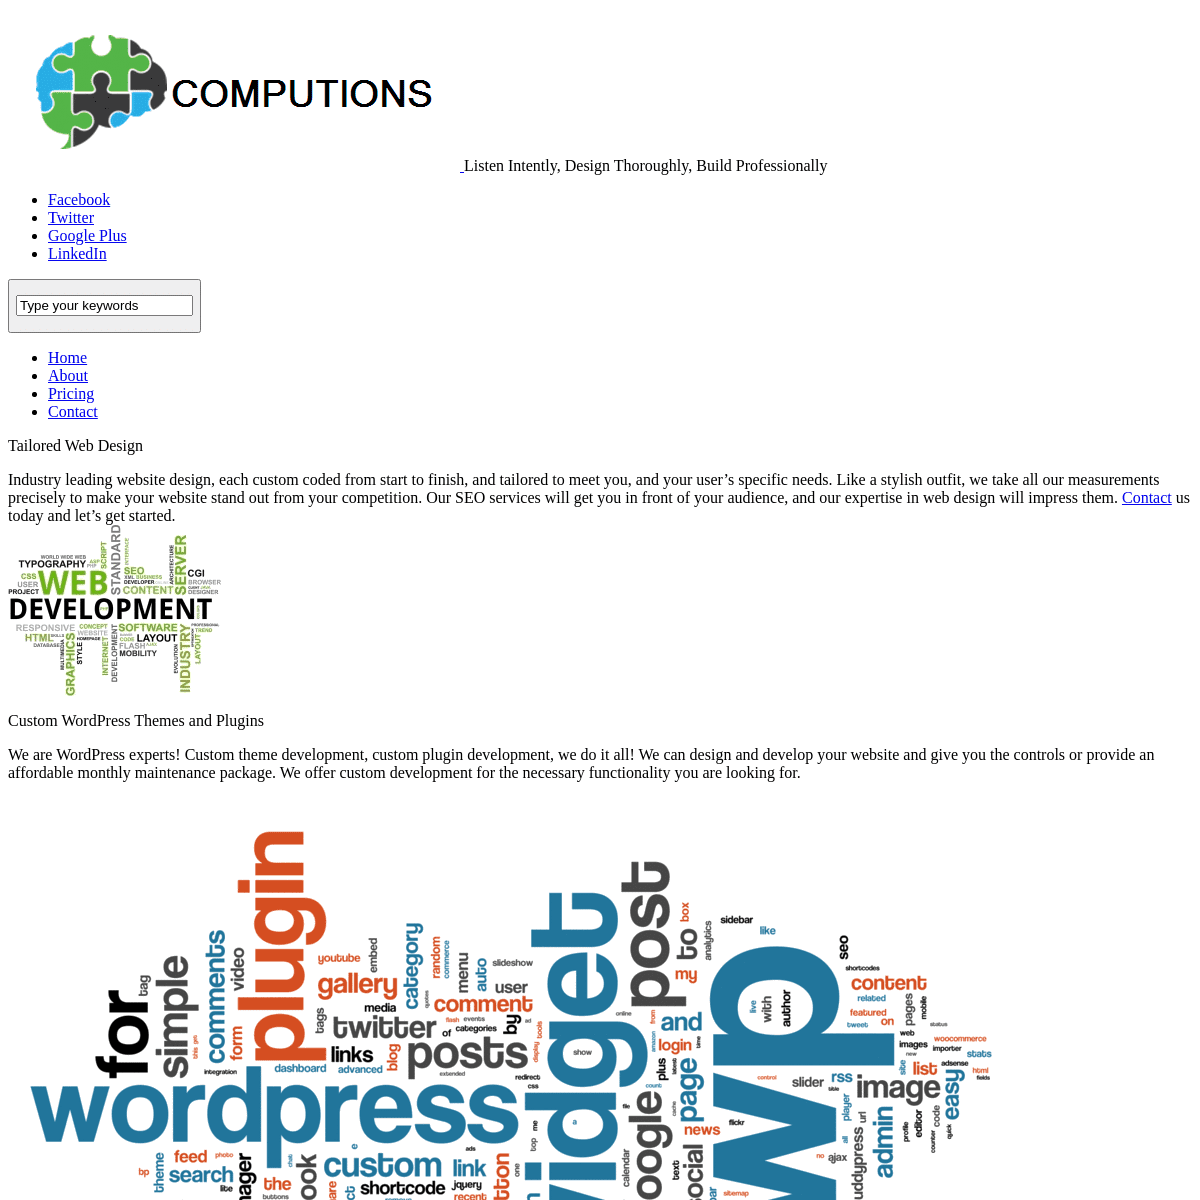 A complete backup of https://computions.ca